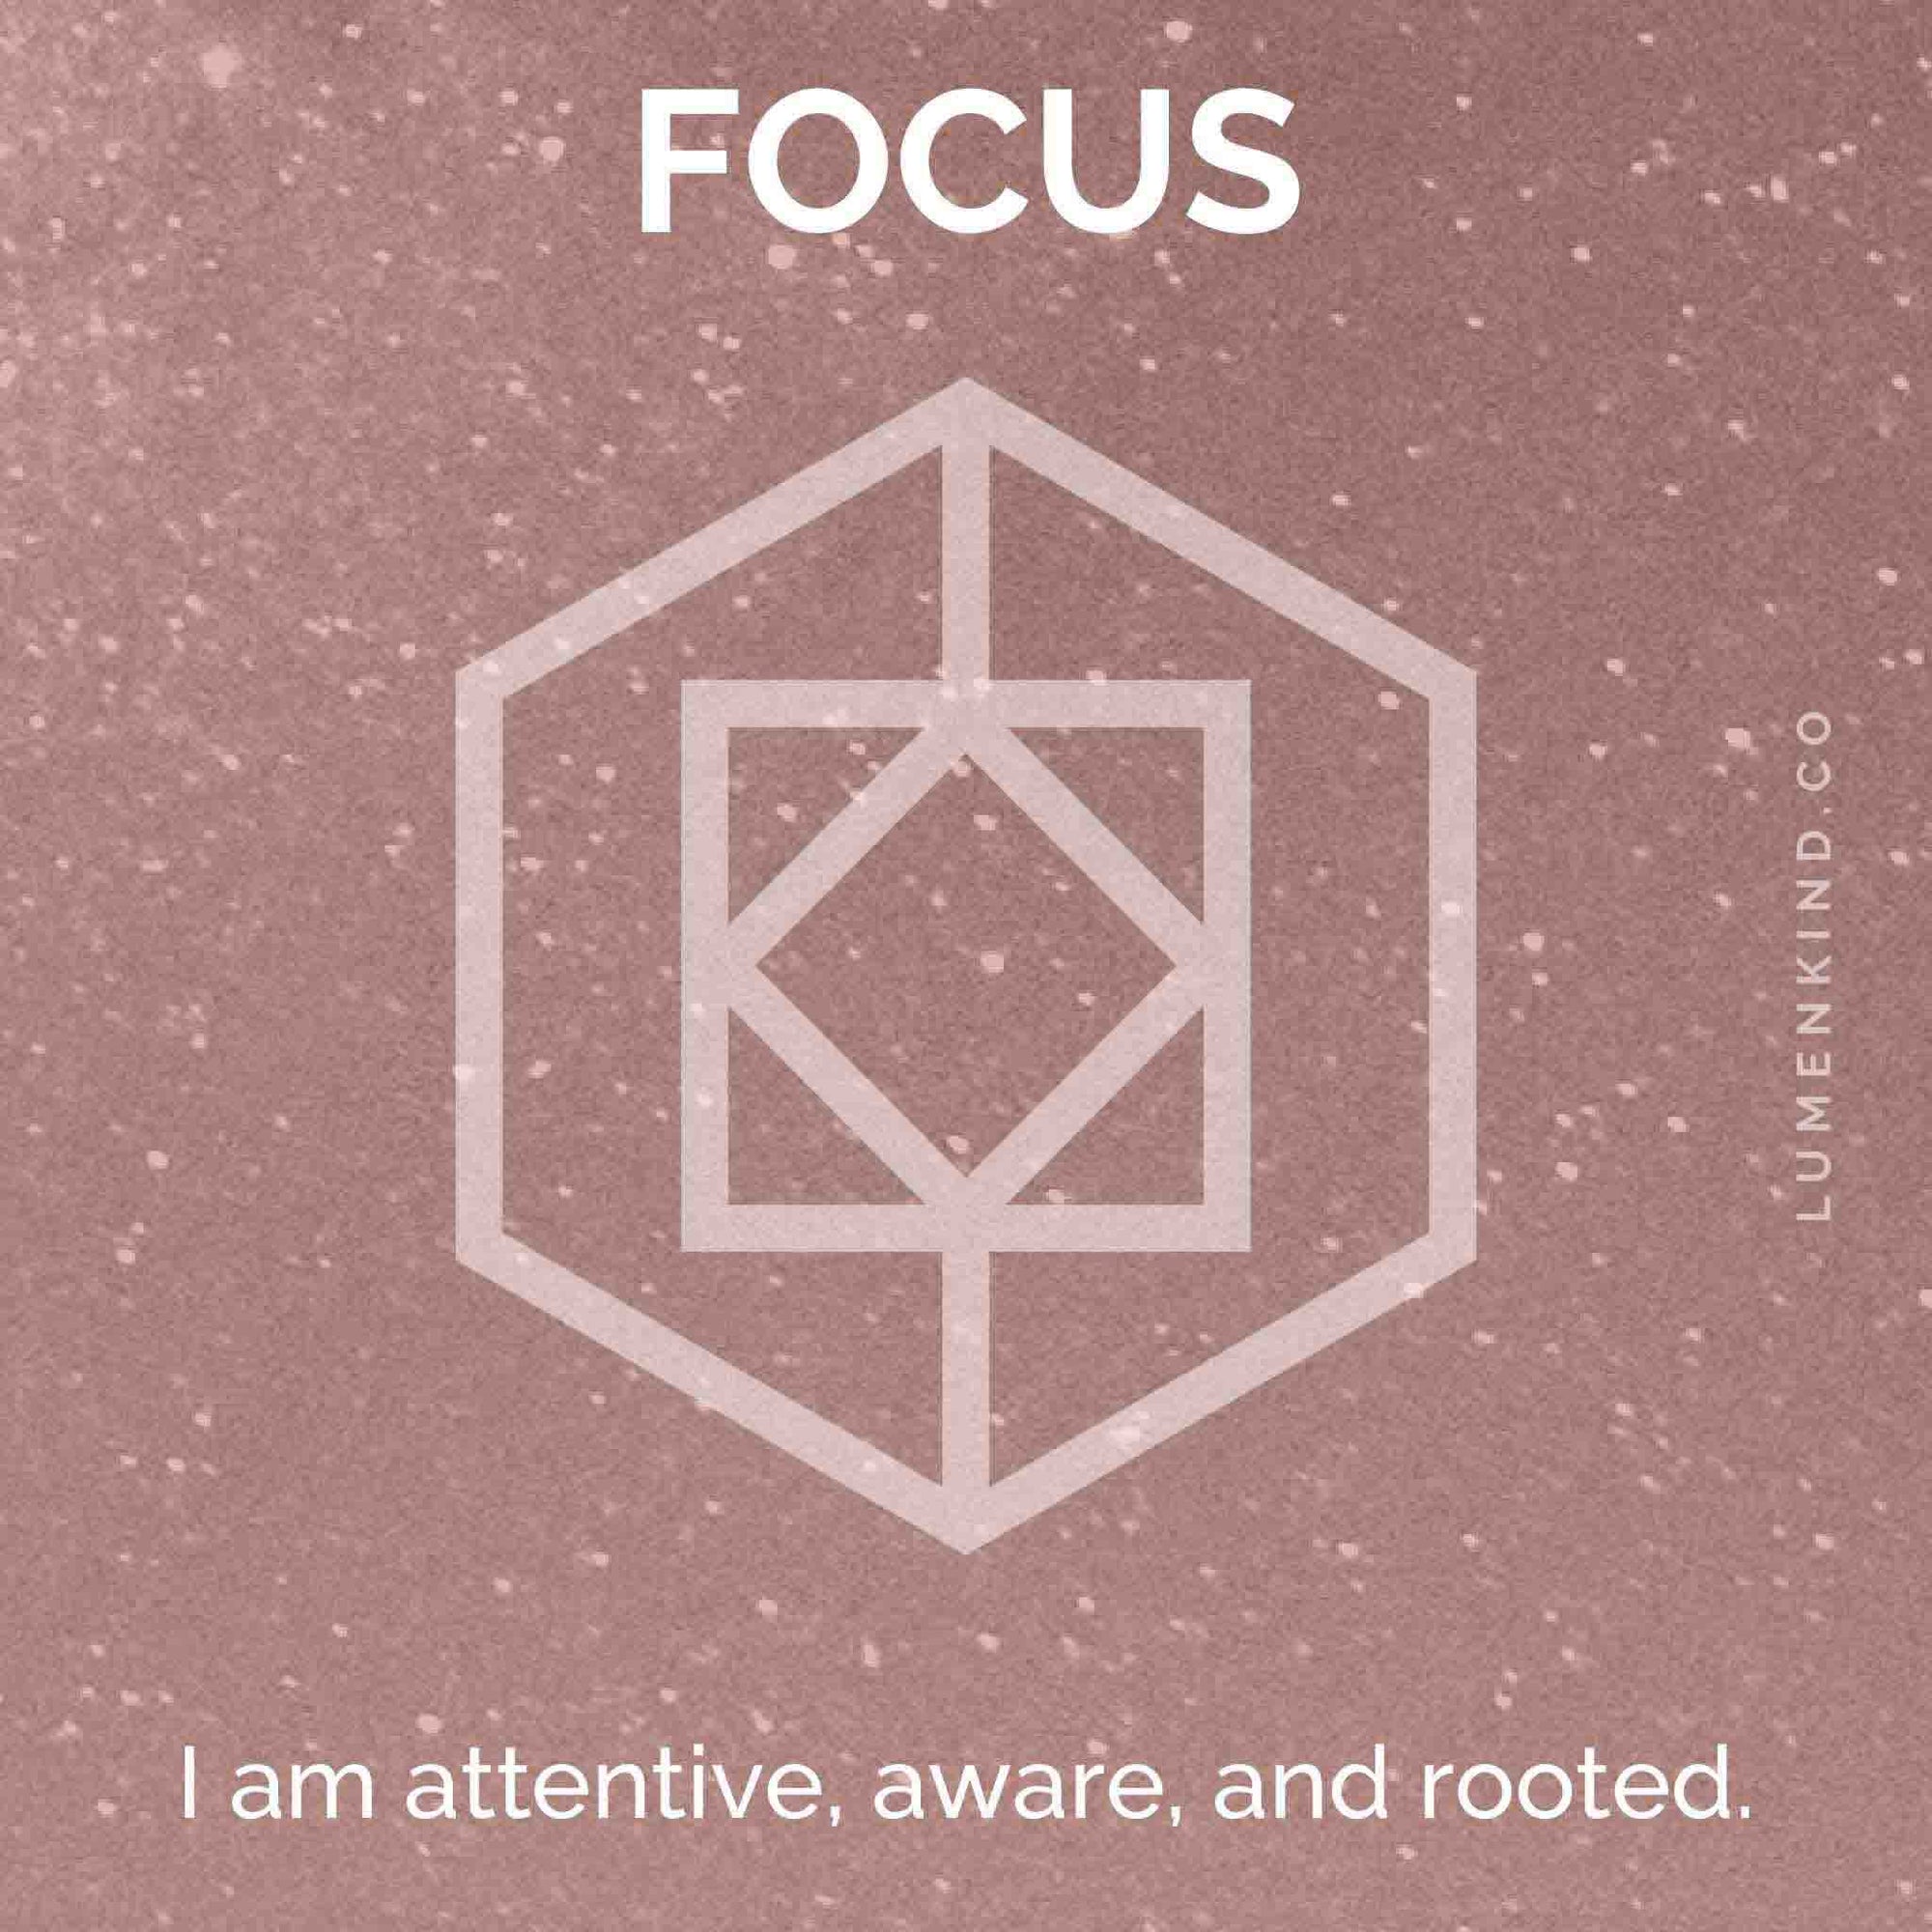 The suggested intention is FOCUS. I am attentive, aware, and rooted.